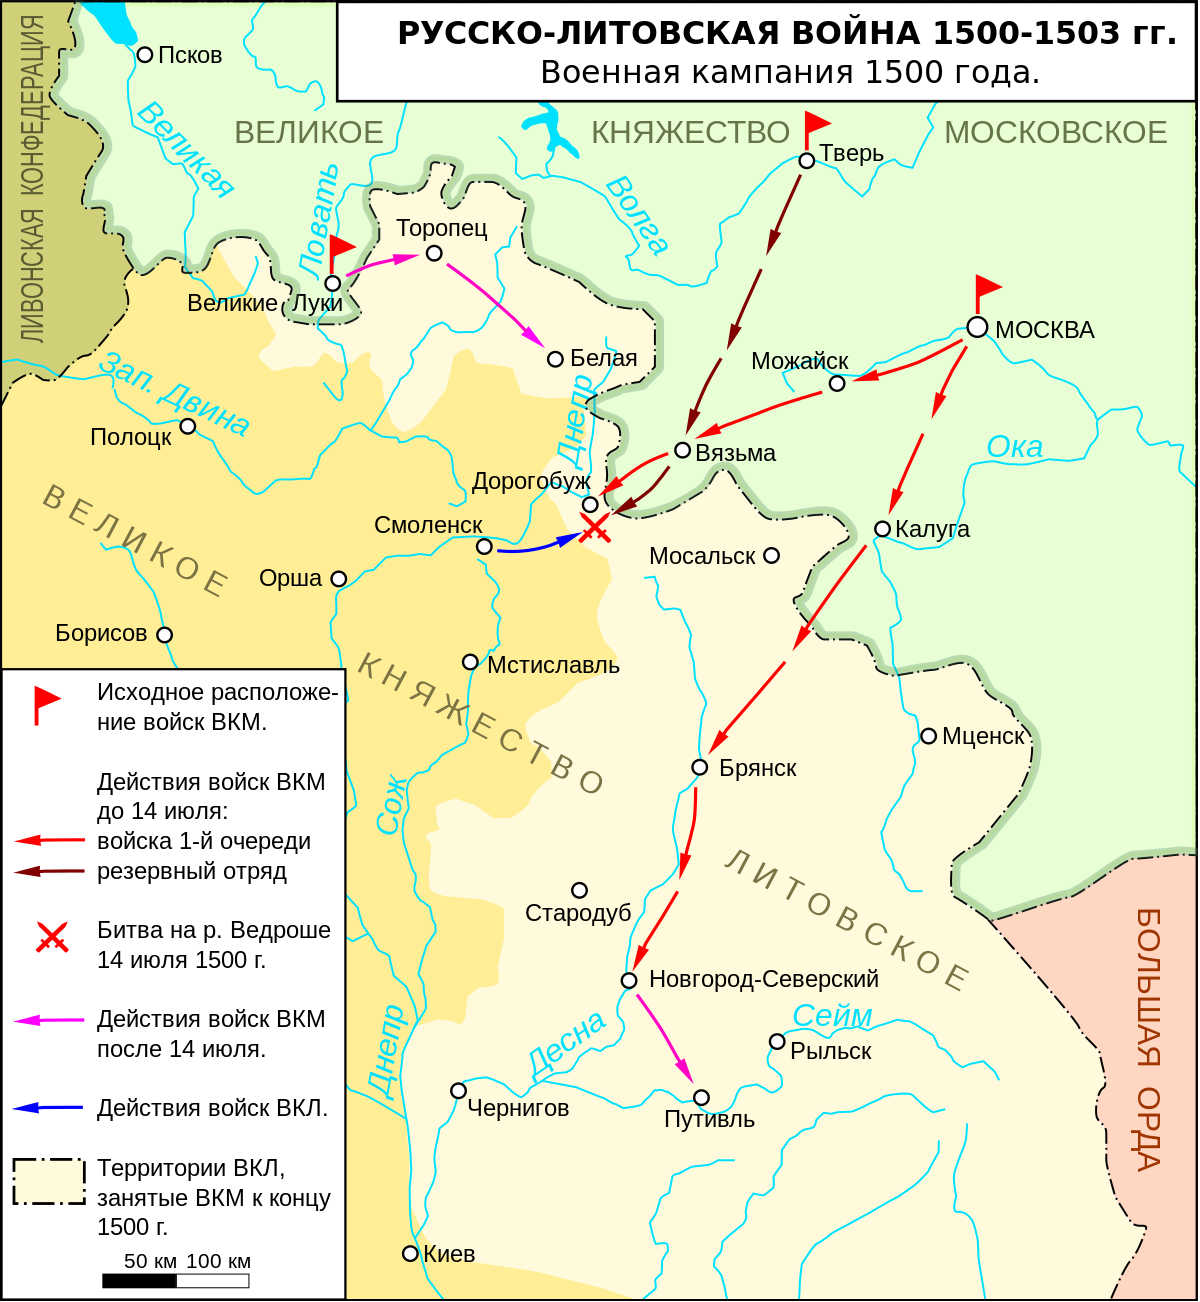 1200px-RussoLithuanian_Wars-1500_campaign-rus0.2.svg.png